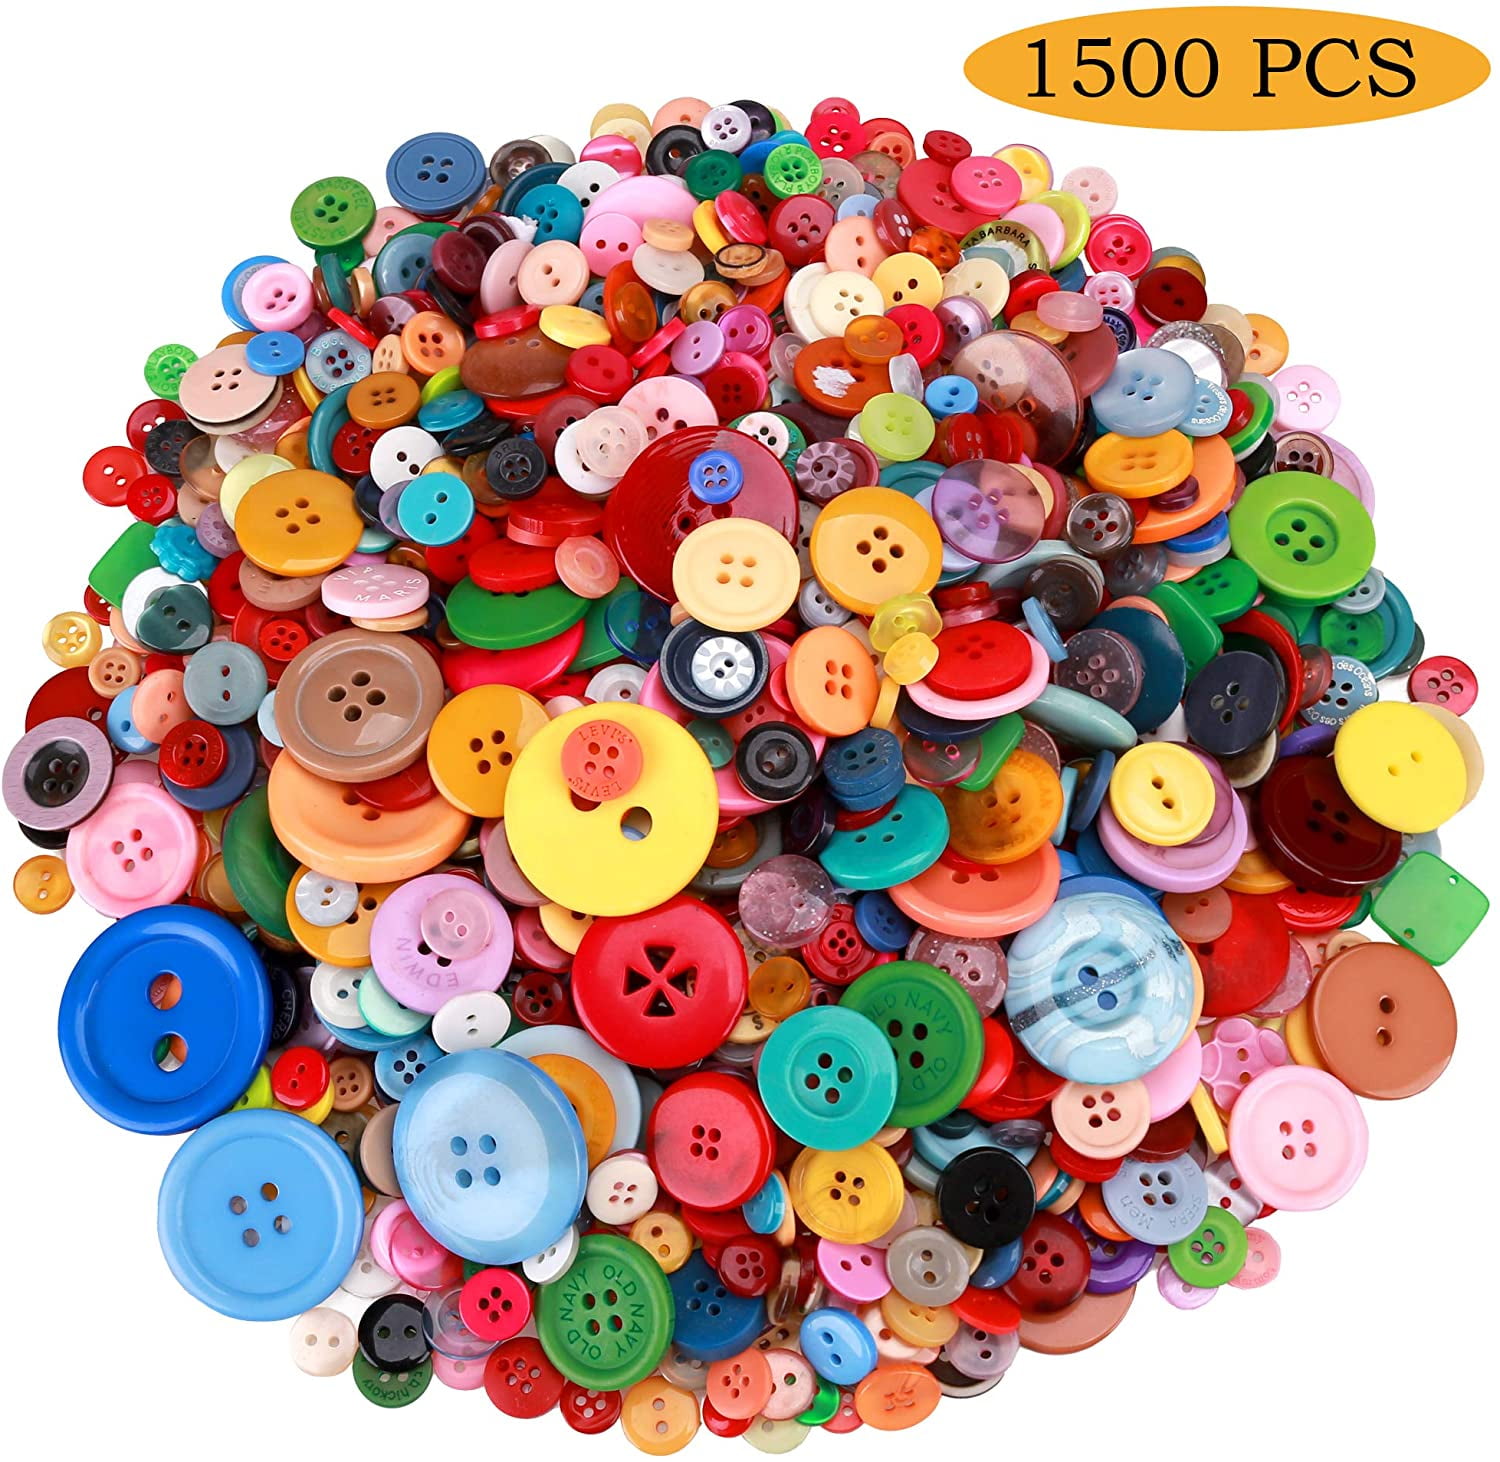 Buttons Galore 50+ Assorted Christmas Buttons for Sewing & Crafts - Set of  6 Button Packs